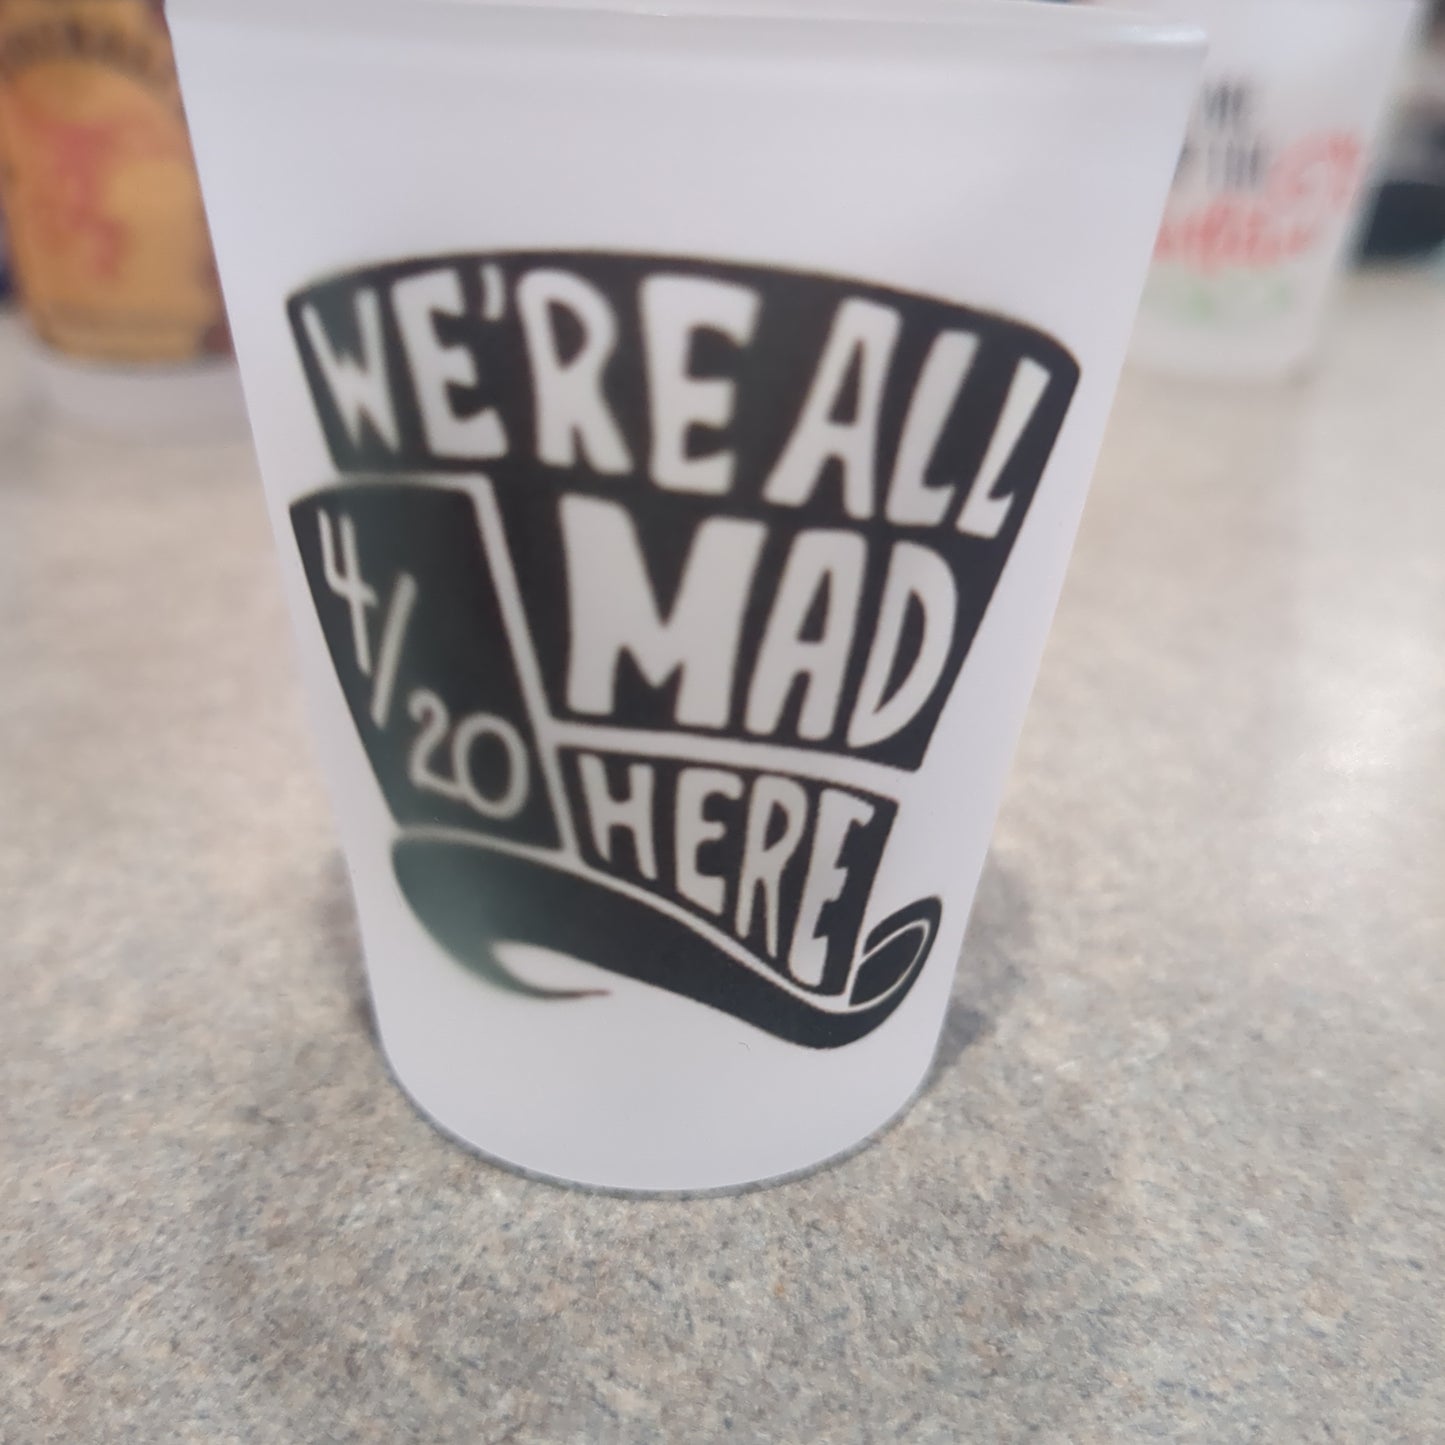 Imperfect Frosted glass shot glass. We're all mad here